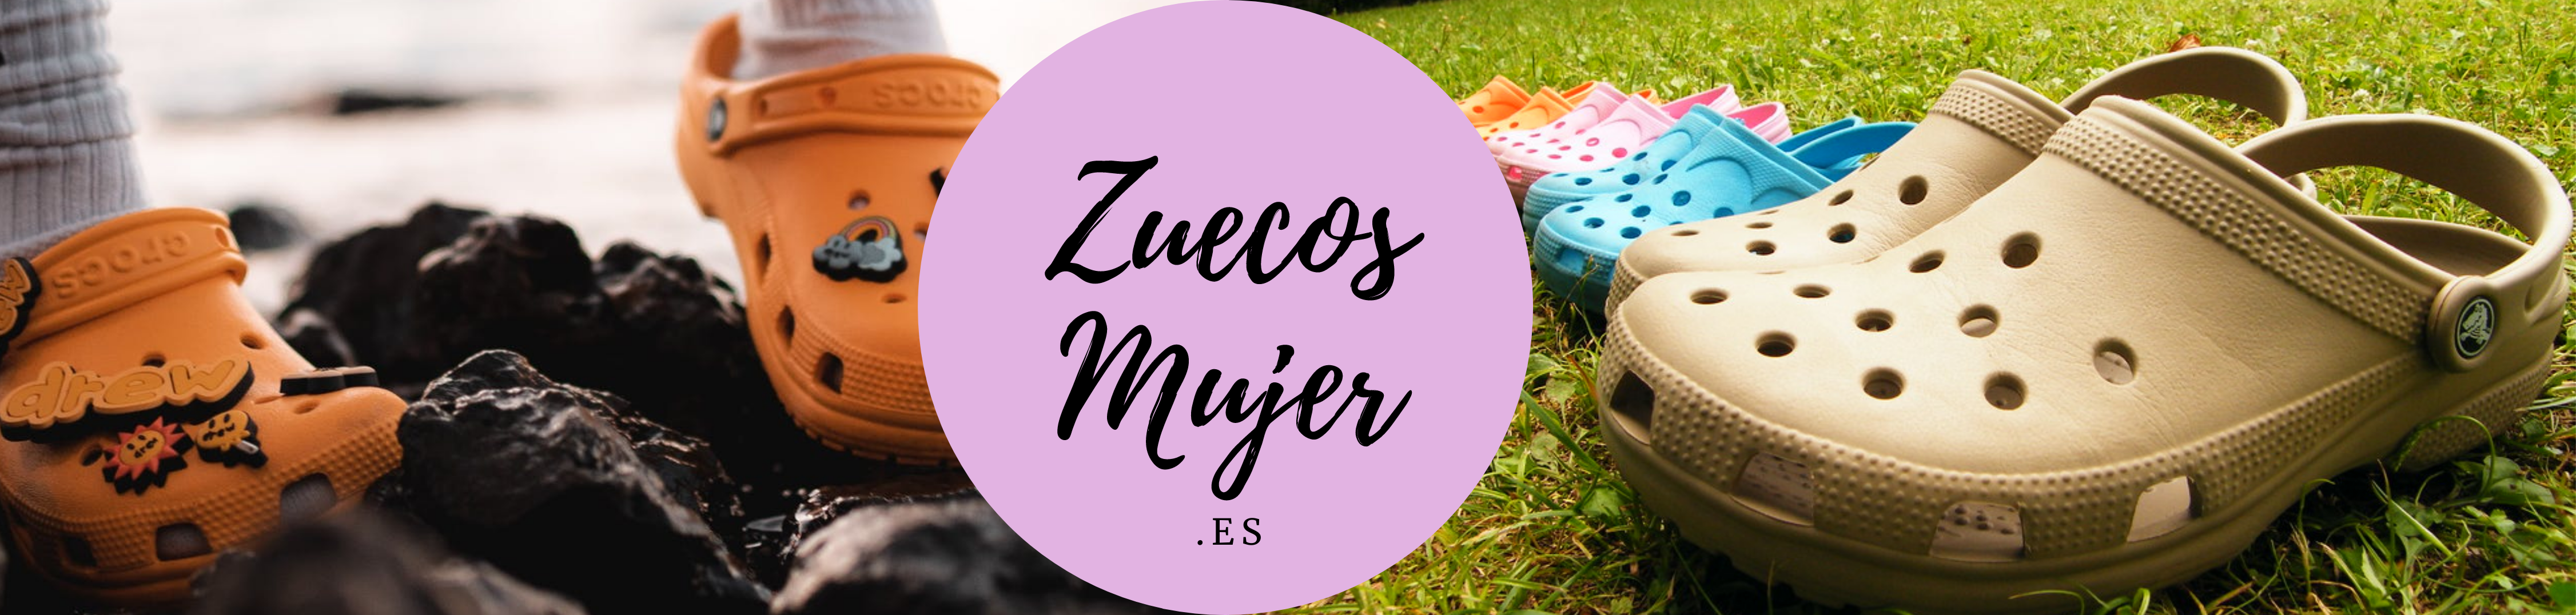 Zuecos Mujer